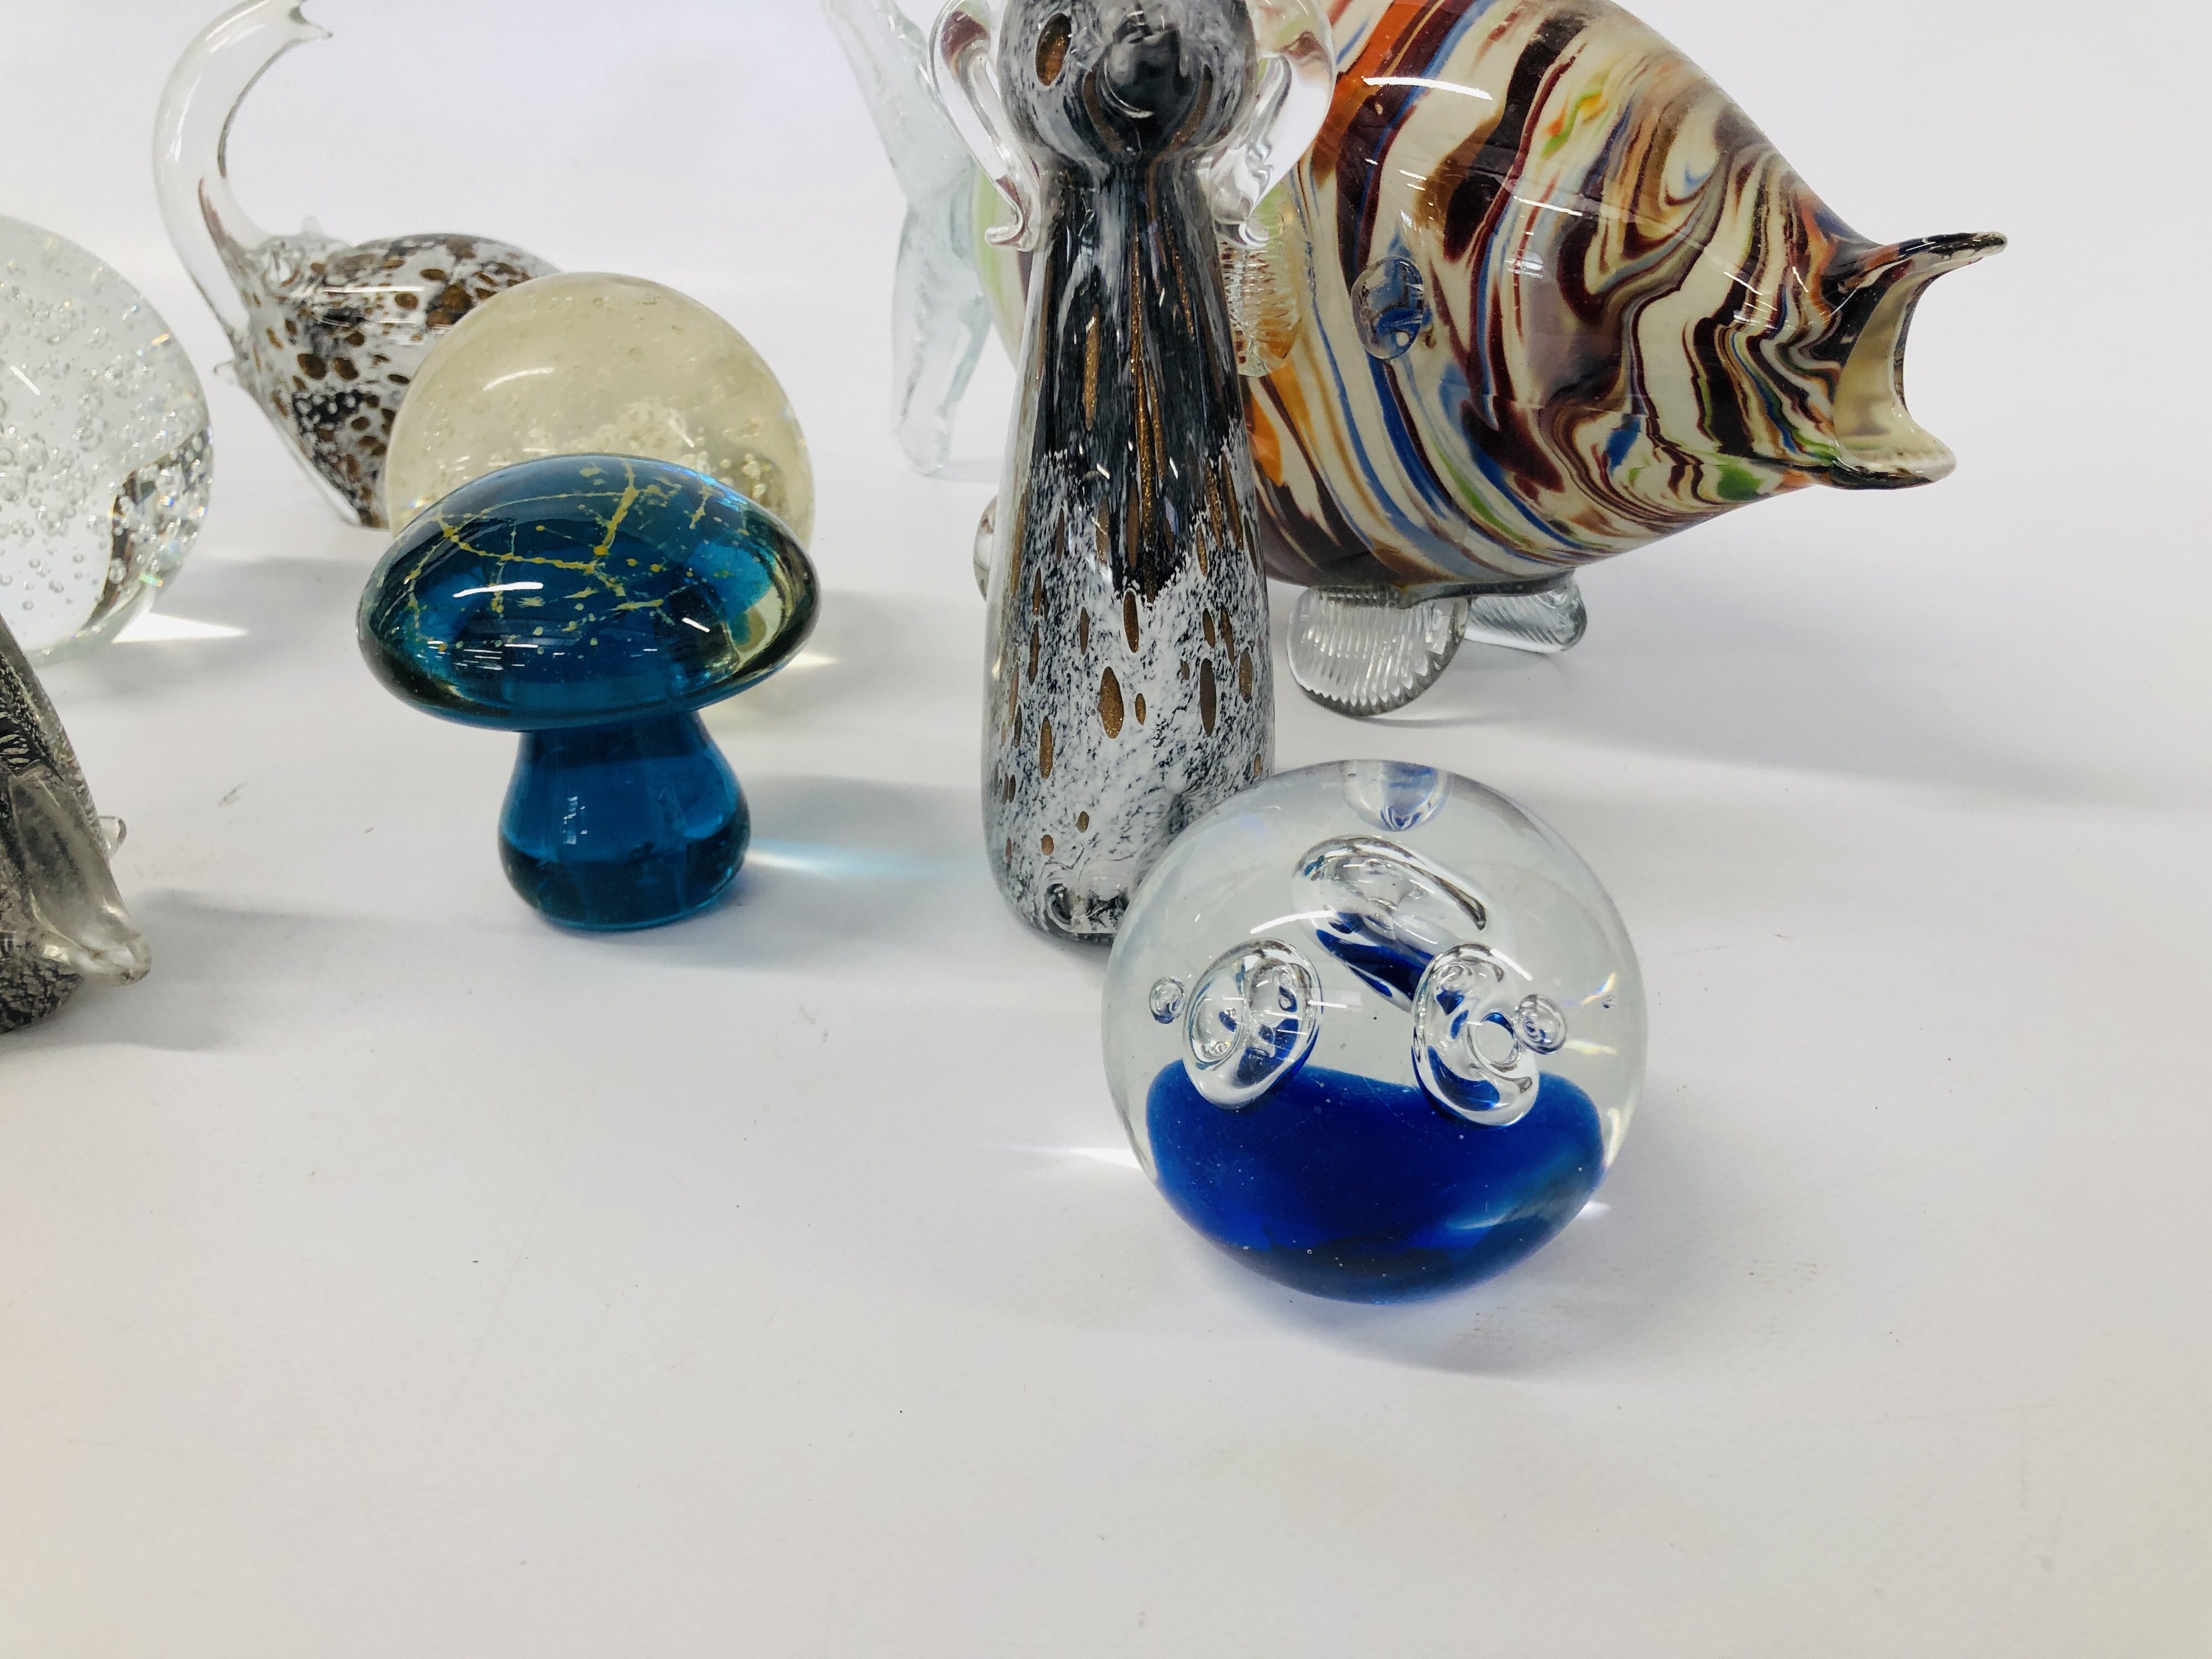 COLLECTION OF ART GLASS PAPERWEIGHTS TO INCLUDE MADINA MUSHROOMS AND AN ART GLASS MURANO STYLE FISH - Image 6 of 6